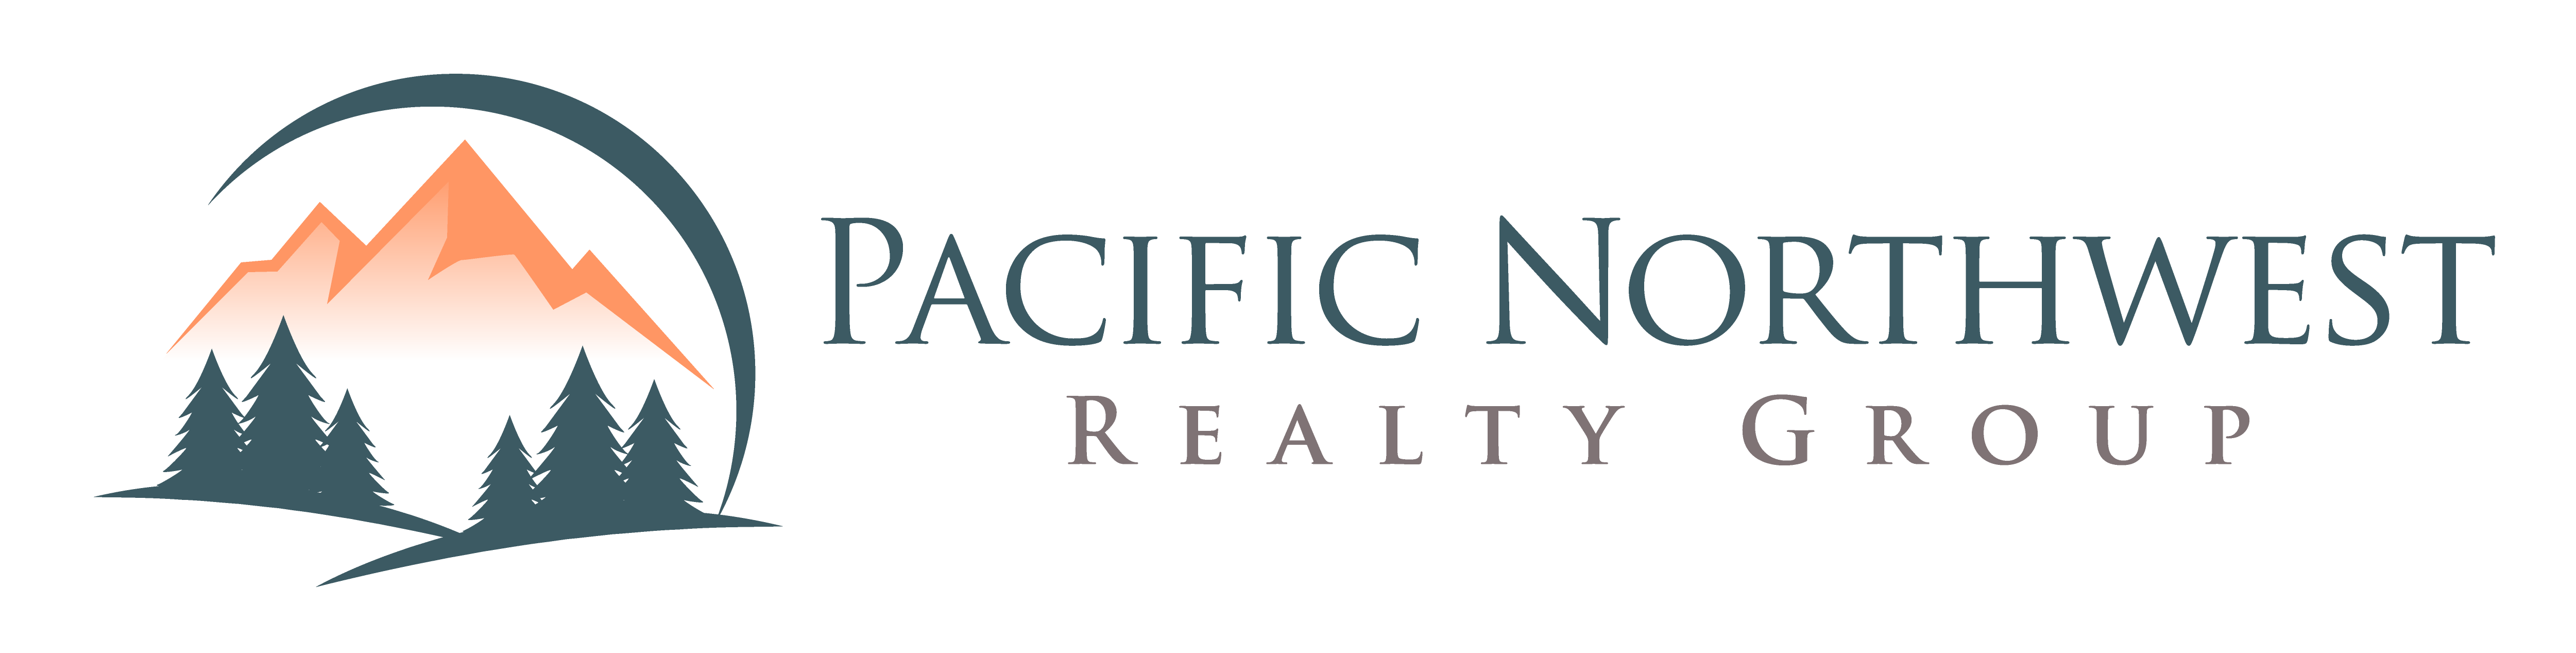 Pacific Northwest Realty Group Logo